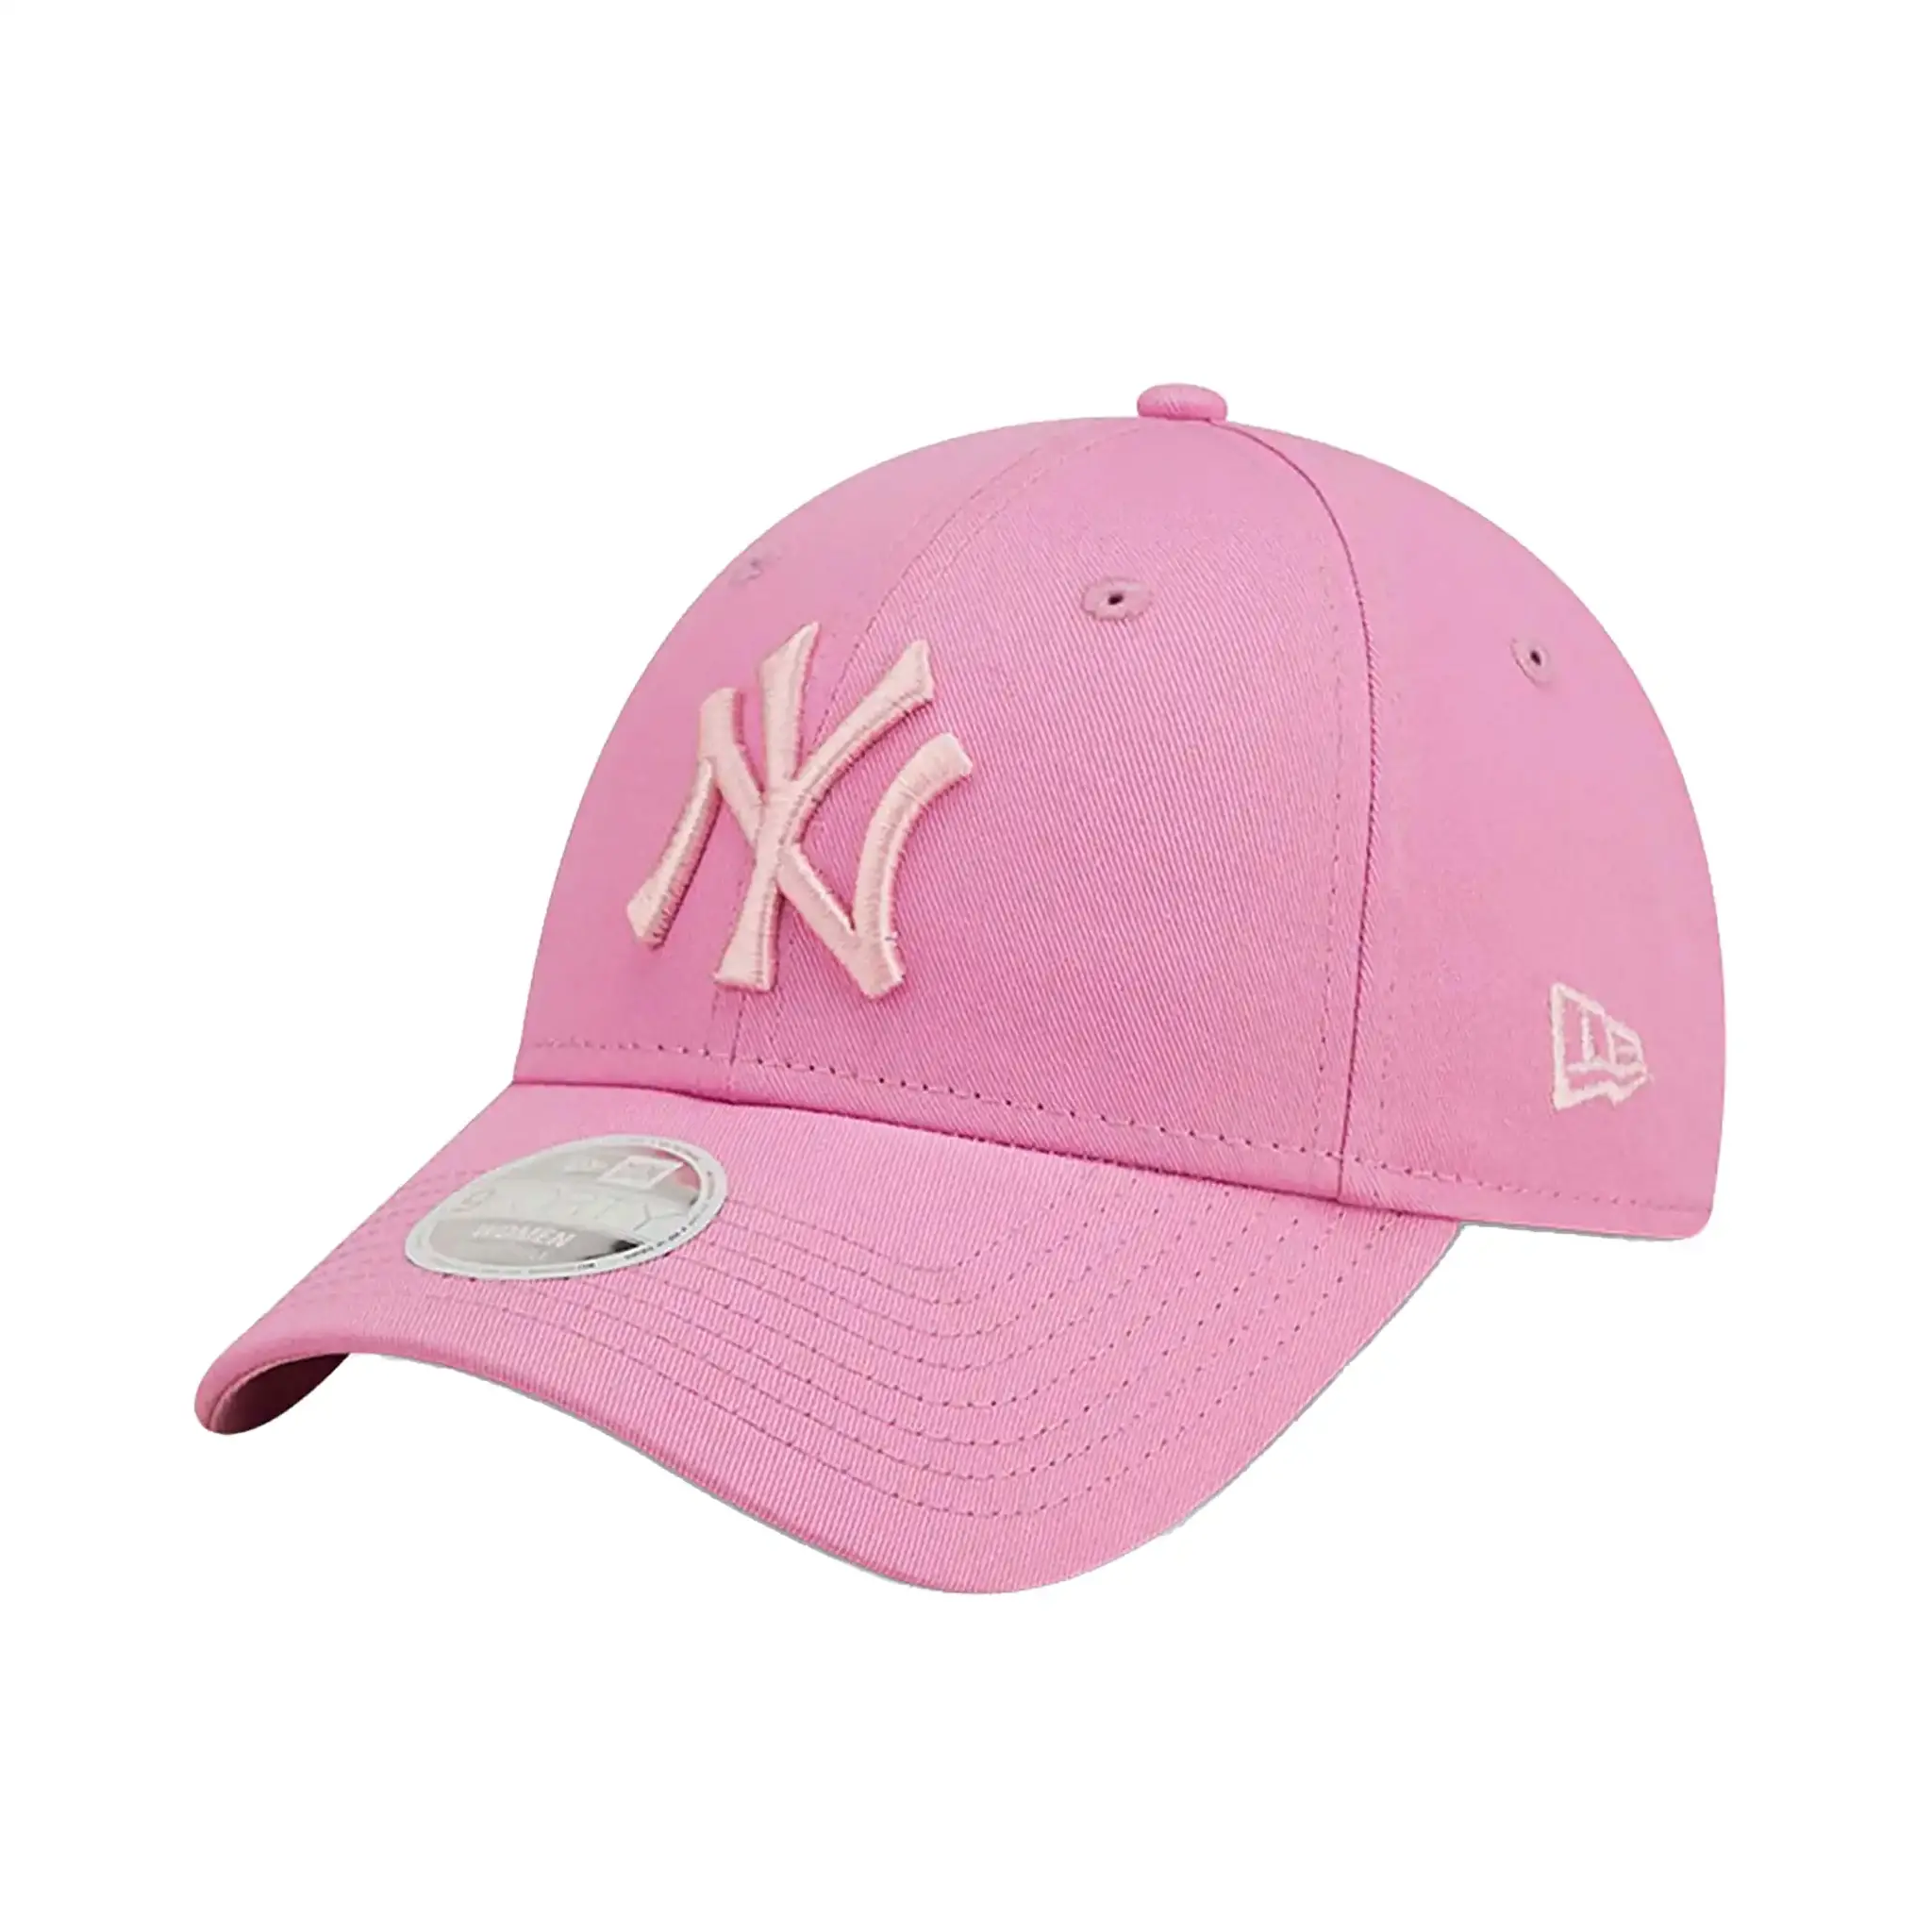 New York Yankees Womens League Essential Pink 9FORTY Cap